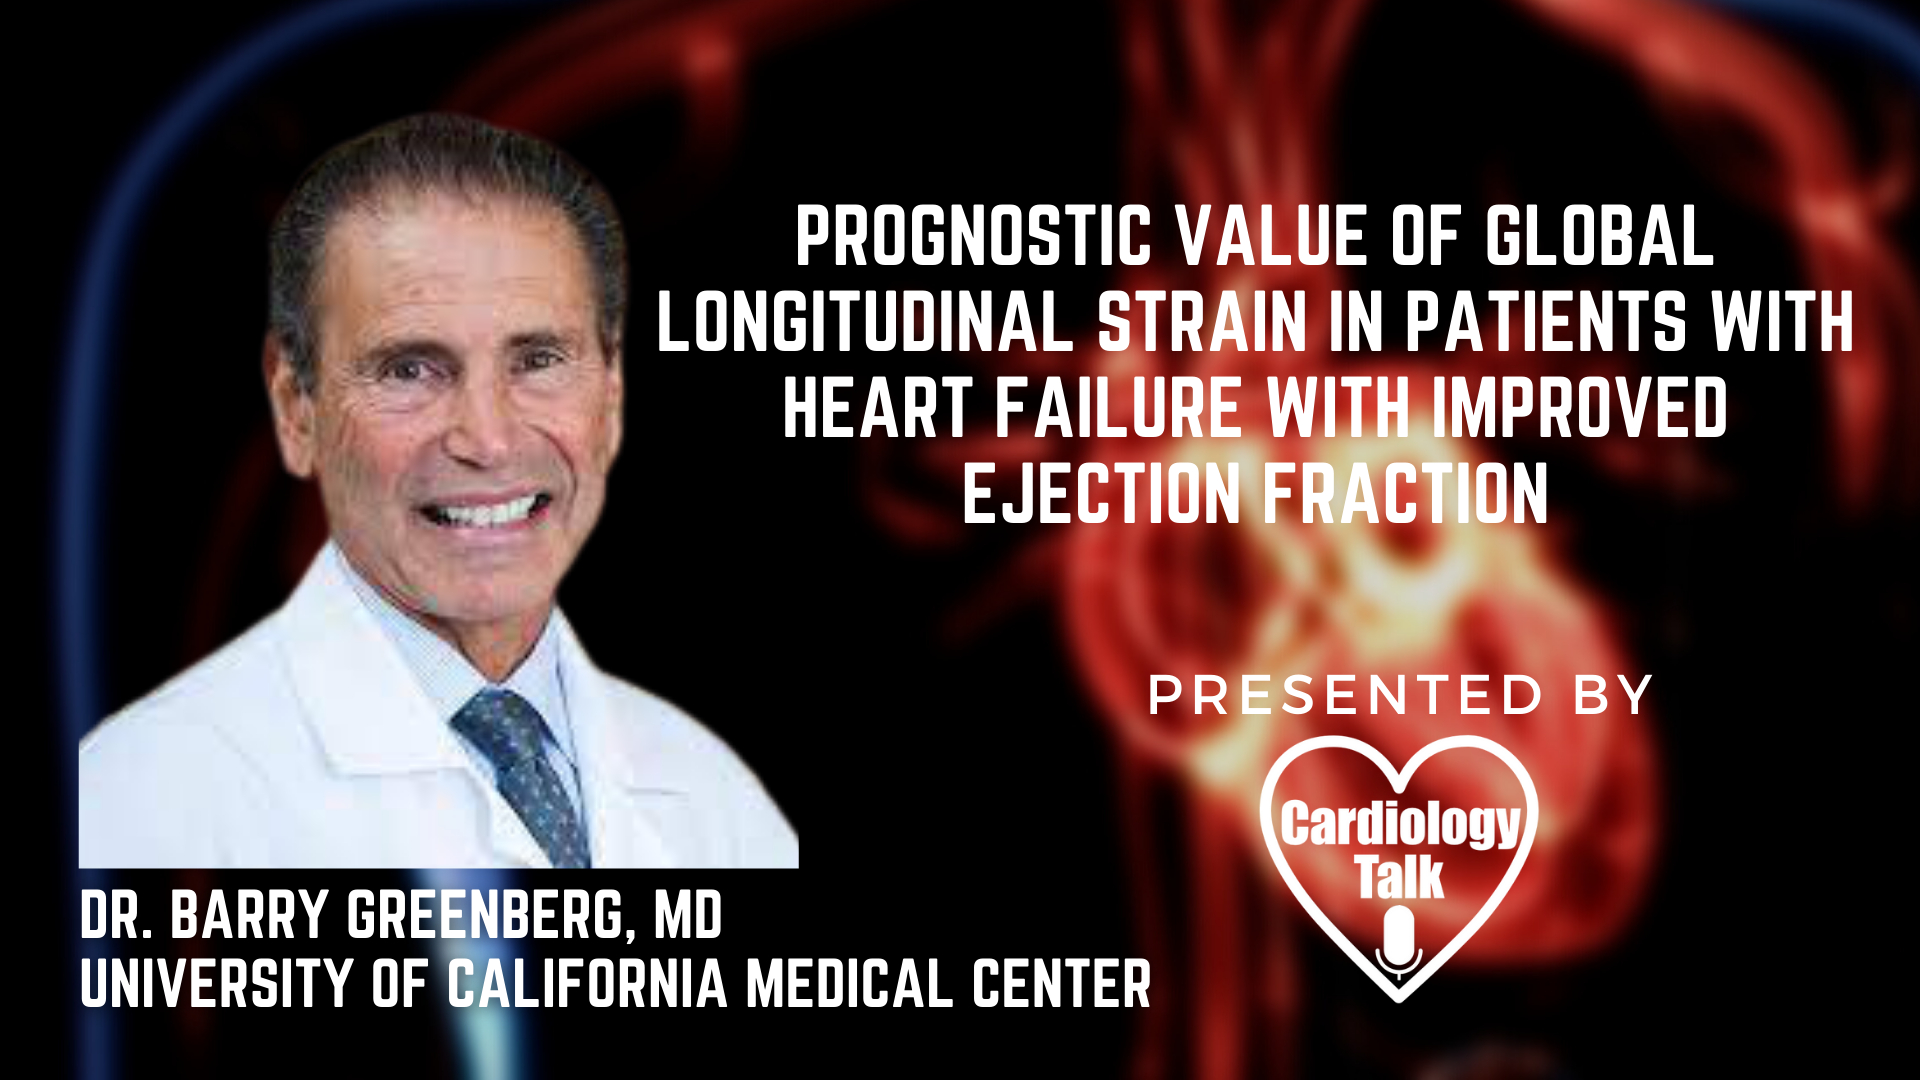 Dr. Barry Greenberg, MD - Prognostic Value of Global Longitudinal Strain in Patients With Heart Failure With Improved Ejection Fraction @UCSDHealth #HeartFailure #Cardiology #Research